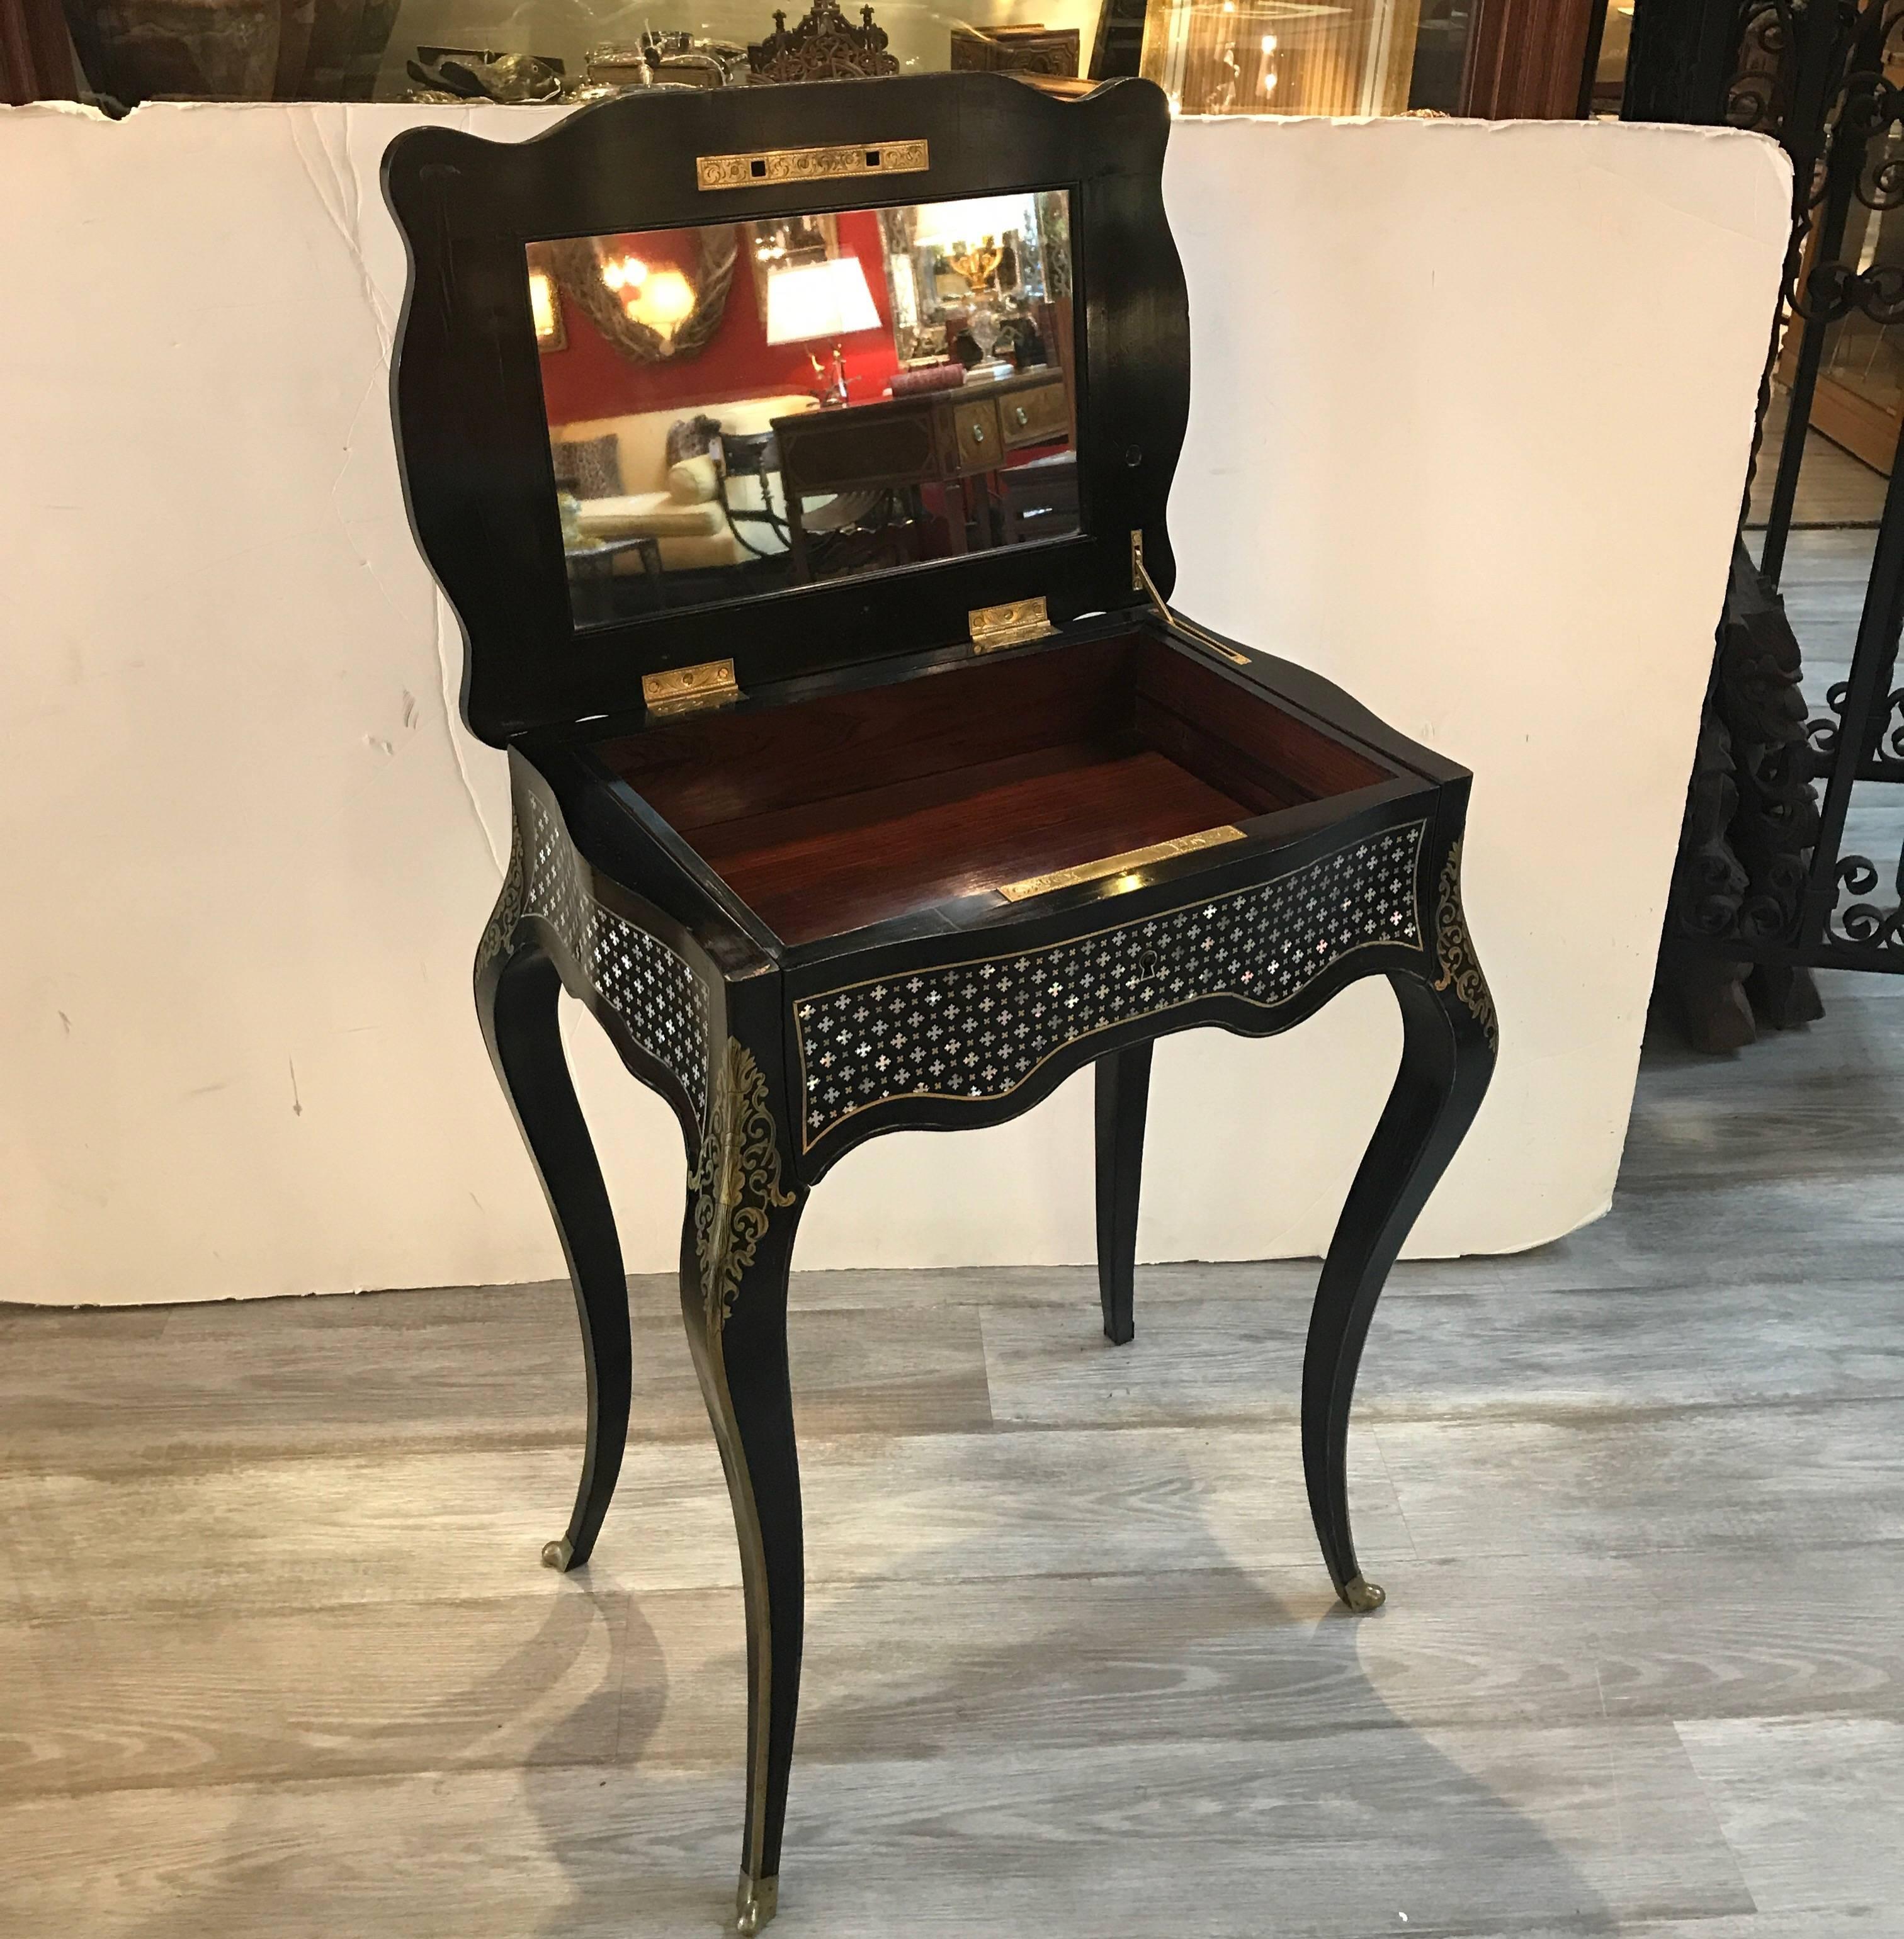 A 19th century ebonized wood and inlaid mother-of-pearl lift top side table. The top lifts to reveal a mirrored top surface which can be used as a small work or dressing table. When the lid is closed there is a single working drawer lined in